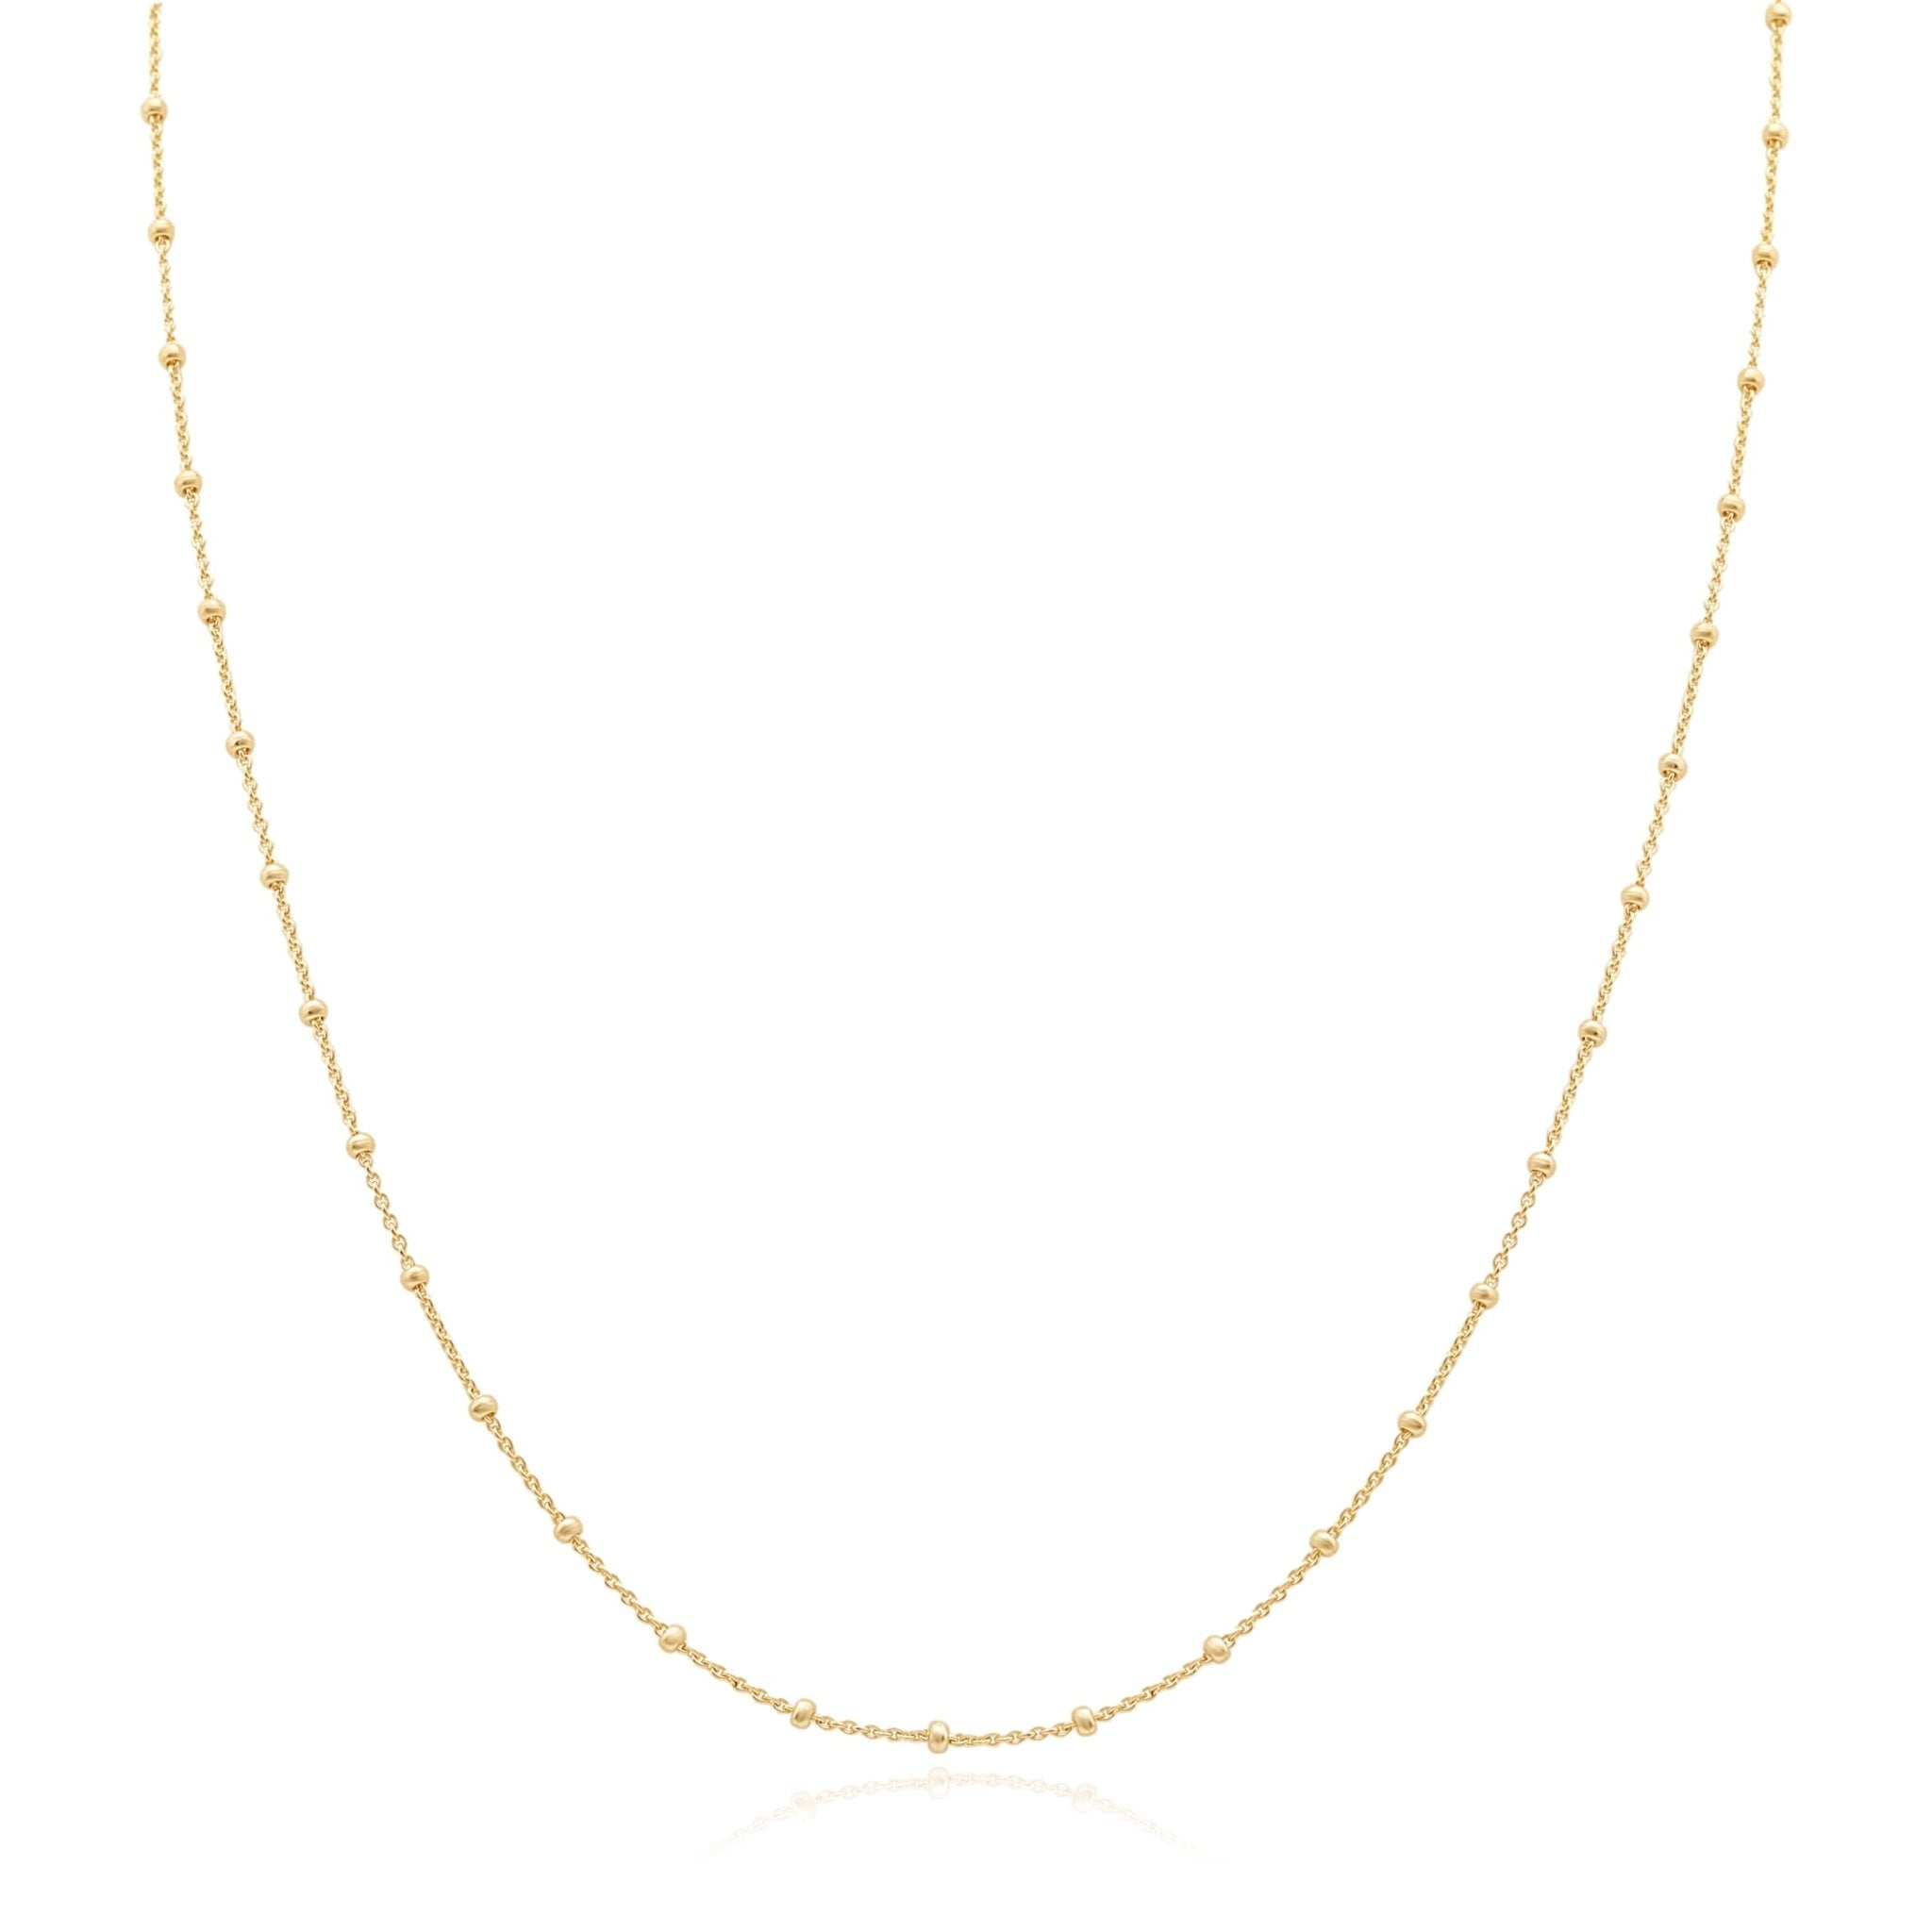 Classic Beaded Chain Necklace Necklaces Estella Collection #product_description# 17981 14k Layering Necklace Ready to Ship #tag4# #tag5# #tag6# #tag7# #tag8# #tag9# #tag10#